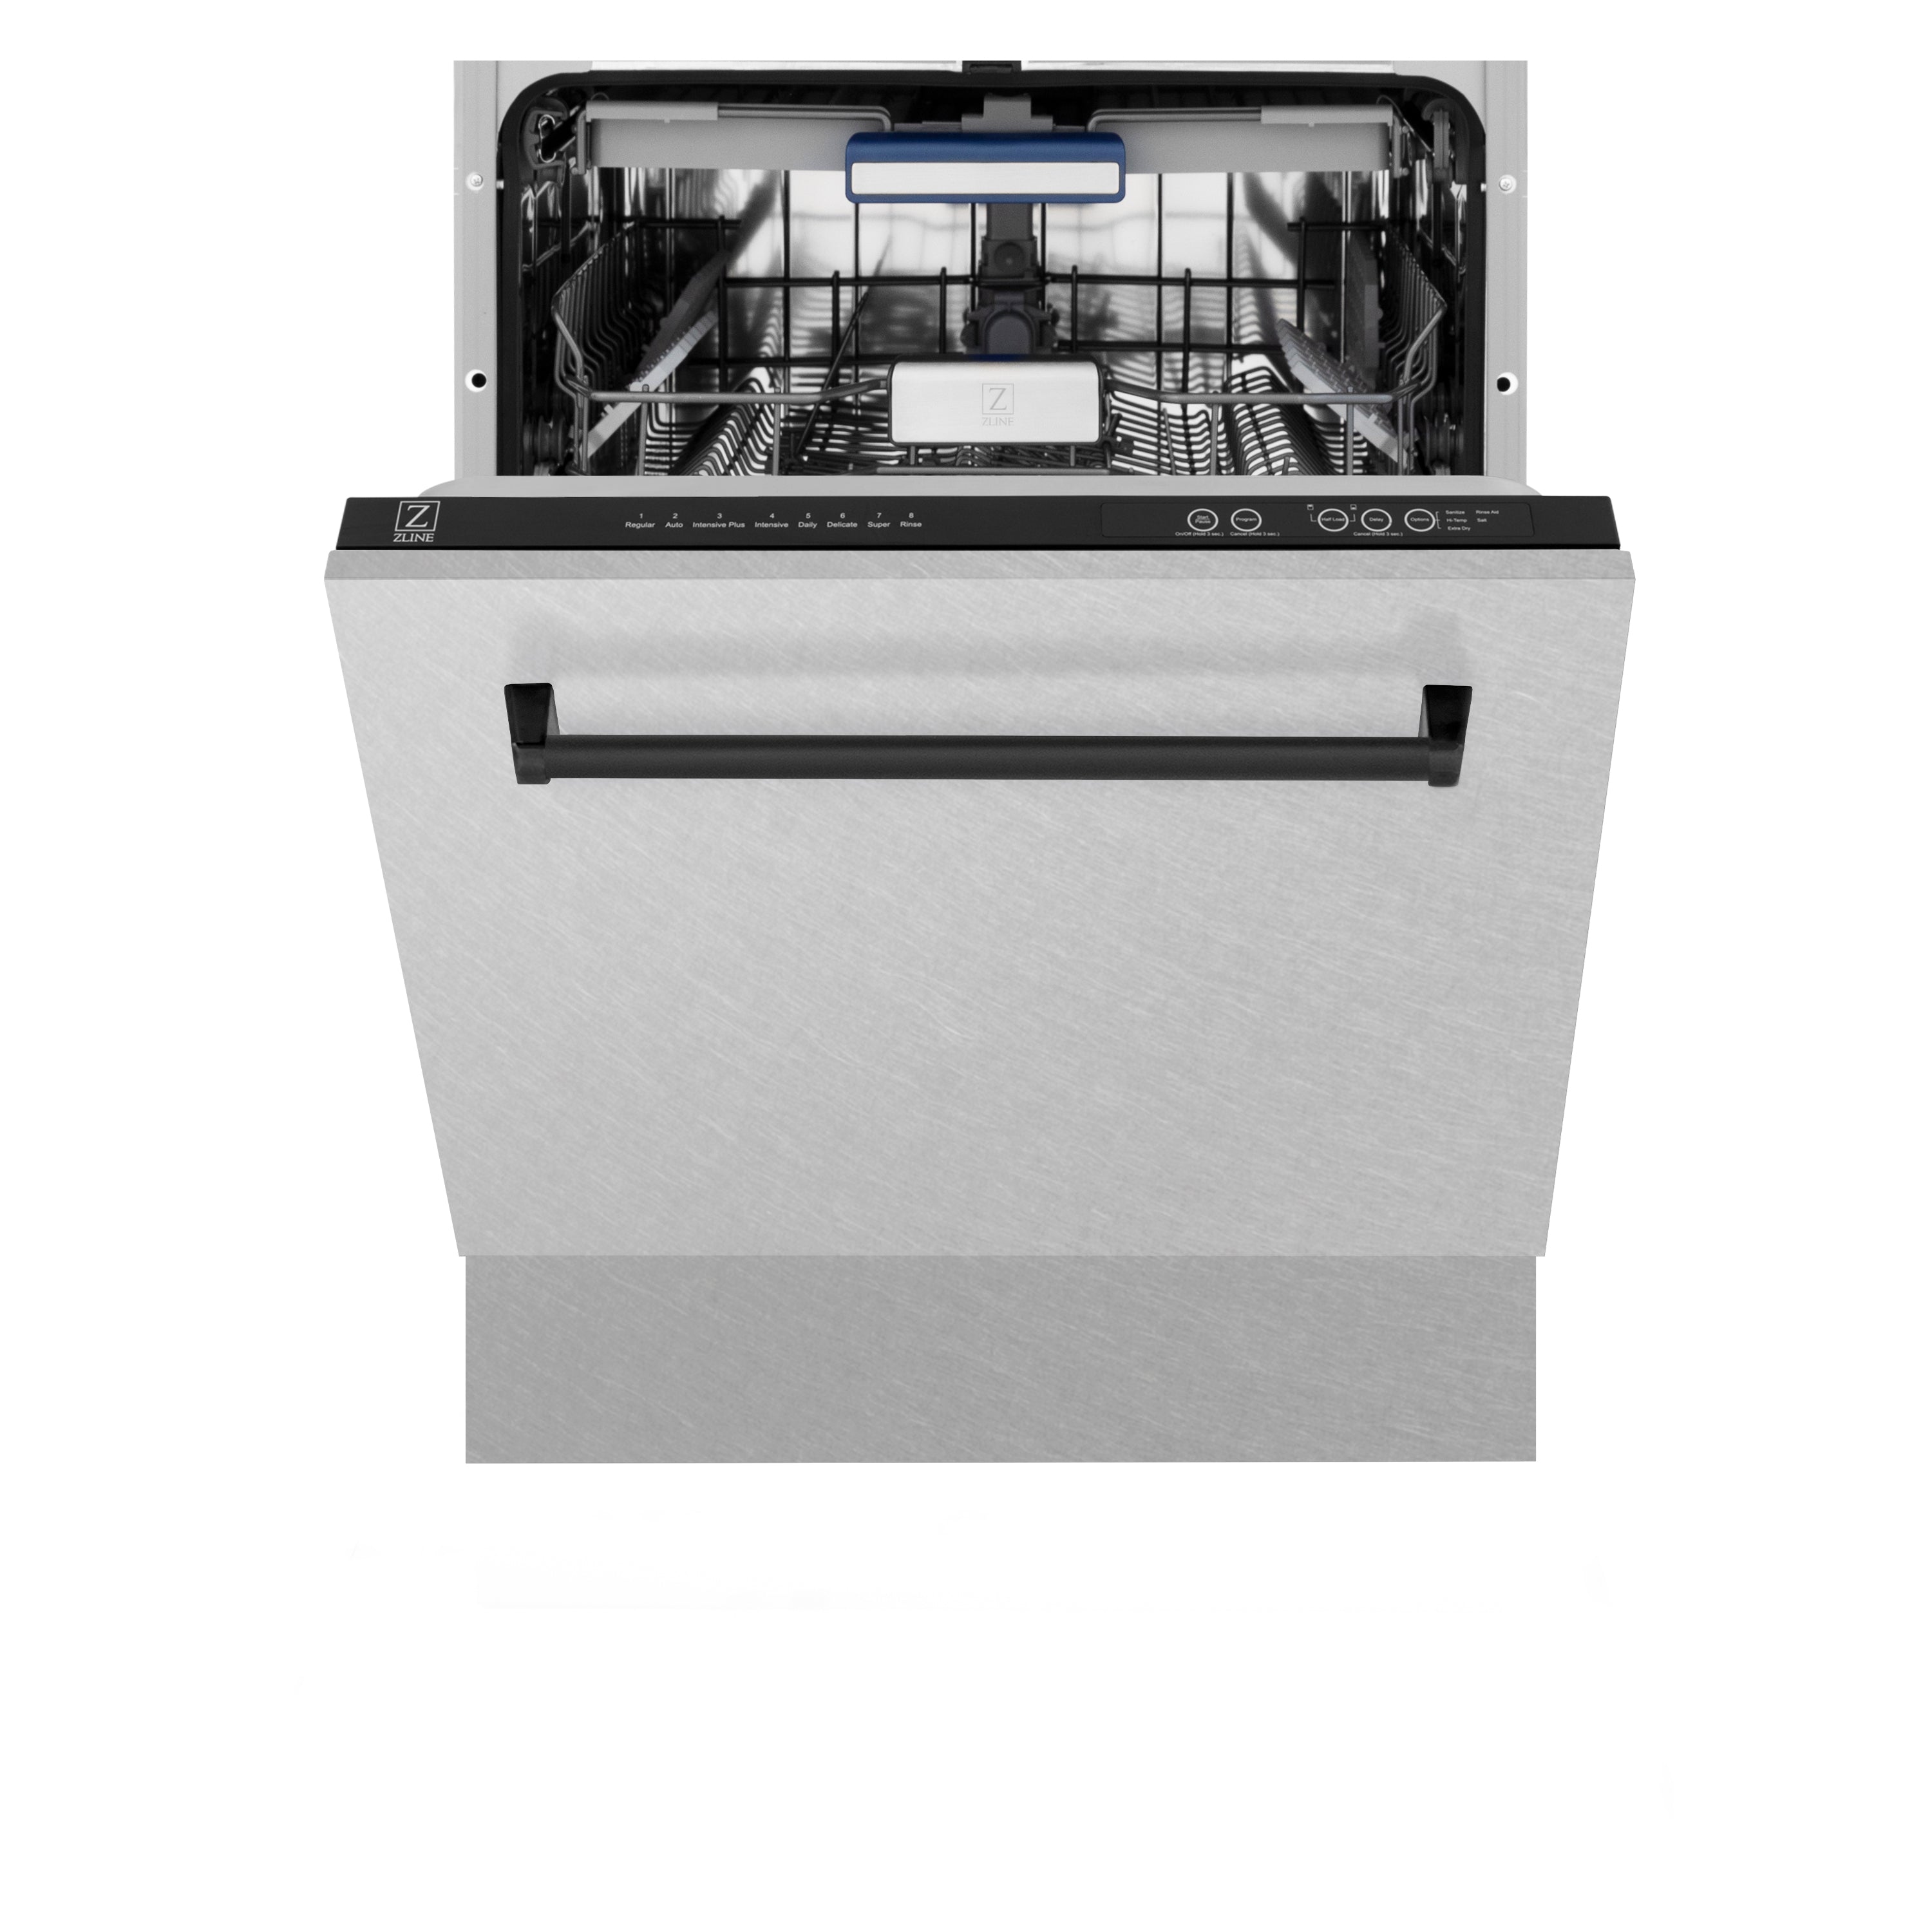 ZLINE Autograph Edition 24" 3rd Rack Top Control Tall Tub Dishwasher in Fingerprint Resistant Stainless Steel with Handle, 51dBa (DWVZ-SN-24-MB)